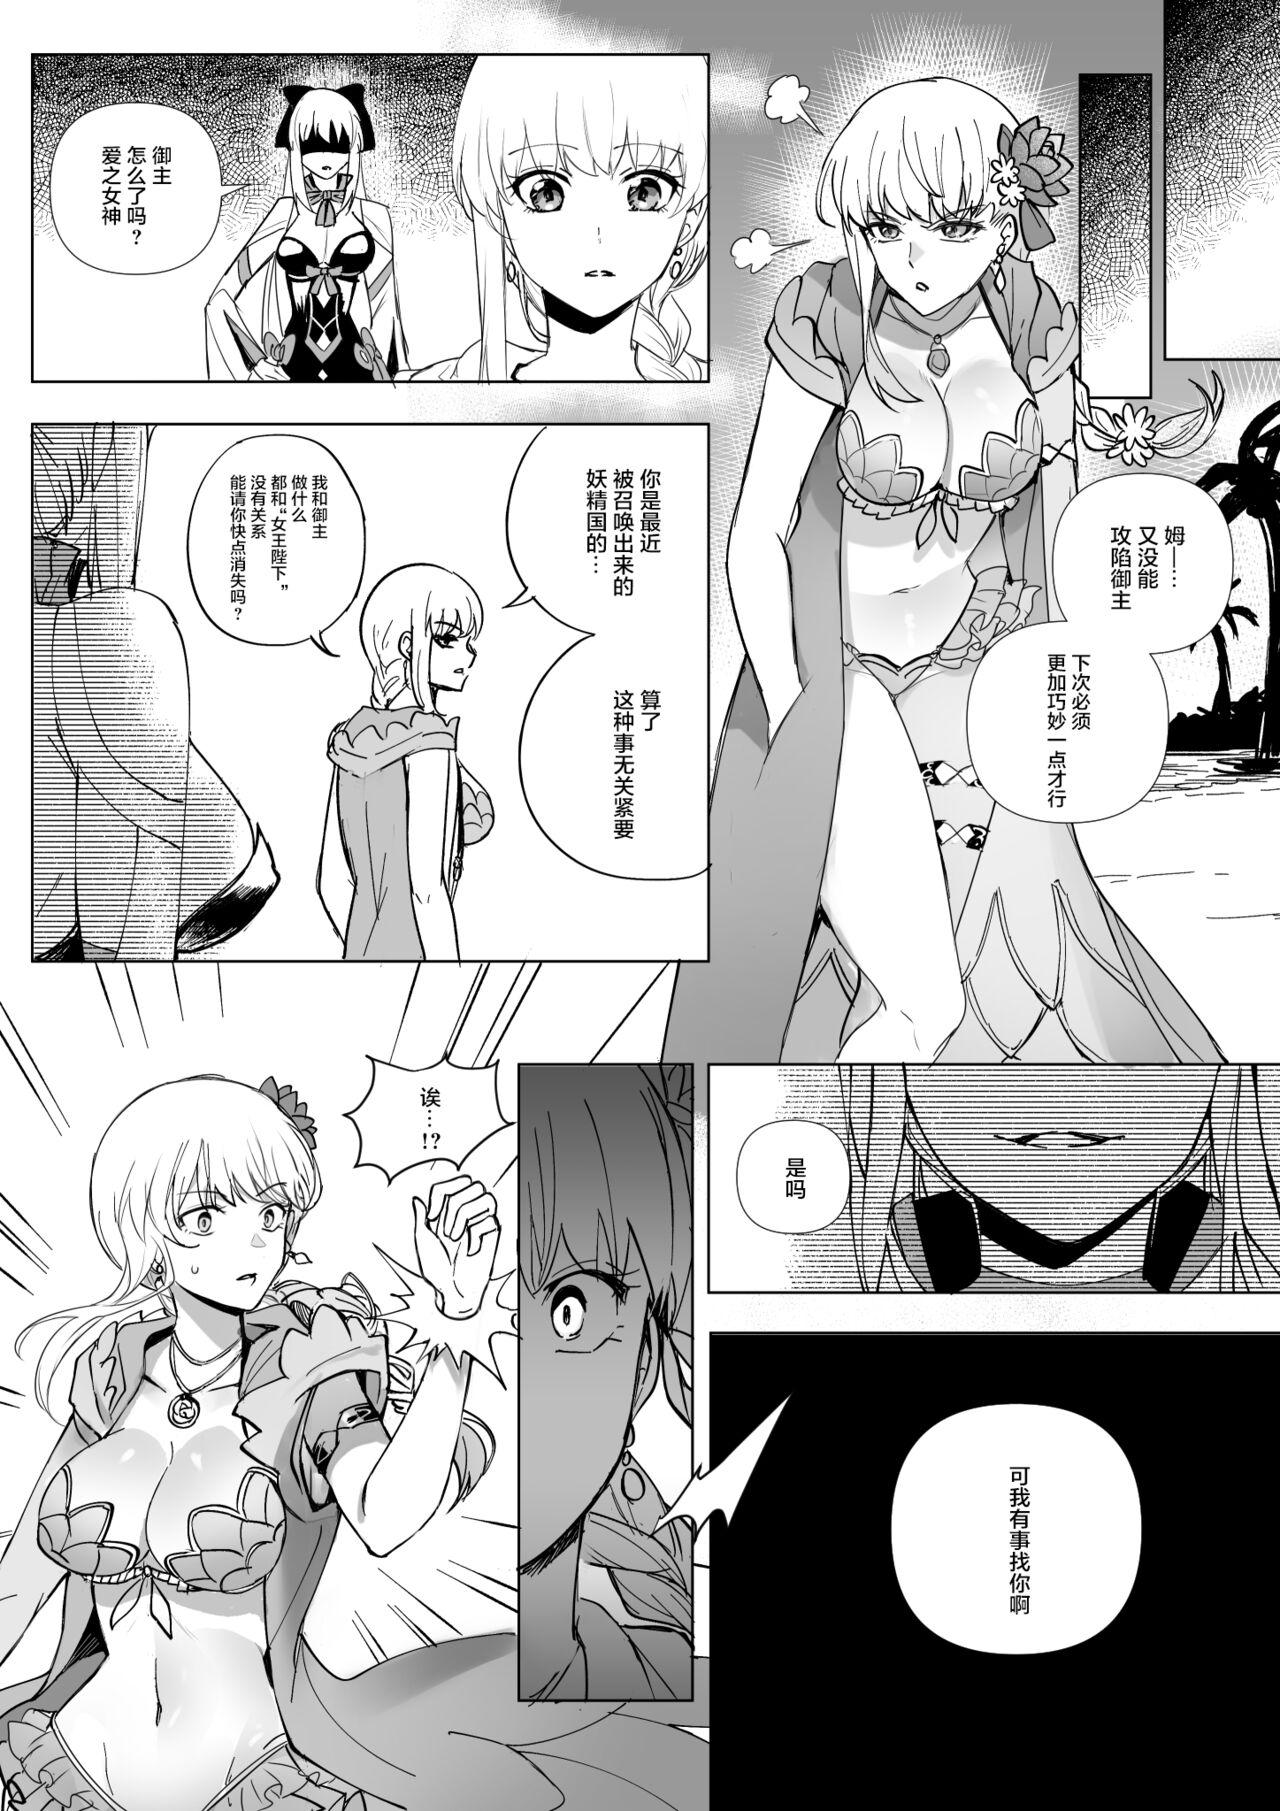 Couch FGO モルガン&水着カーマ憑依 - Fate grand order Emo - Page 5